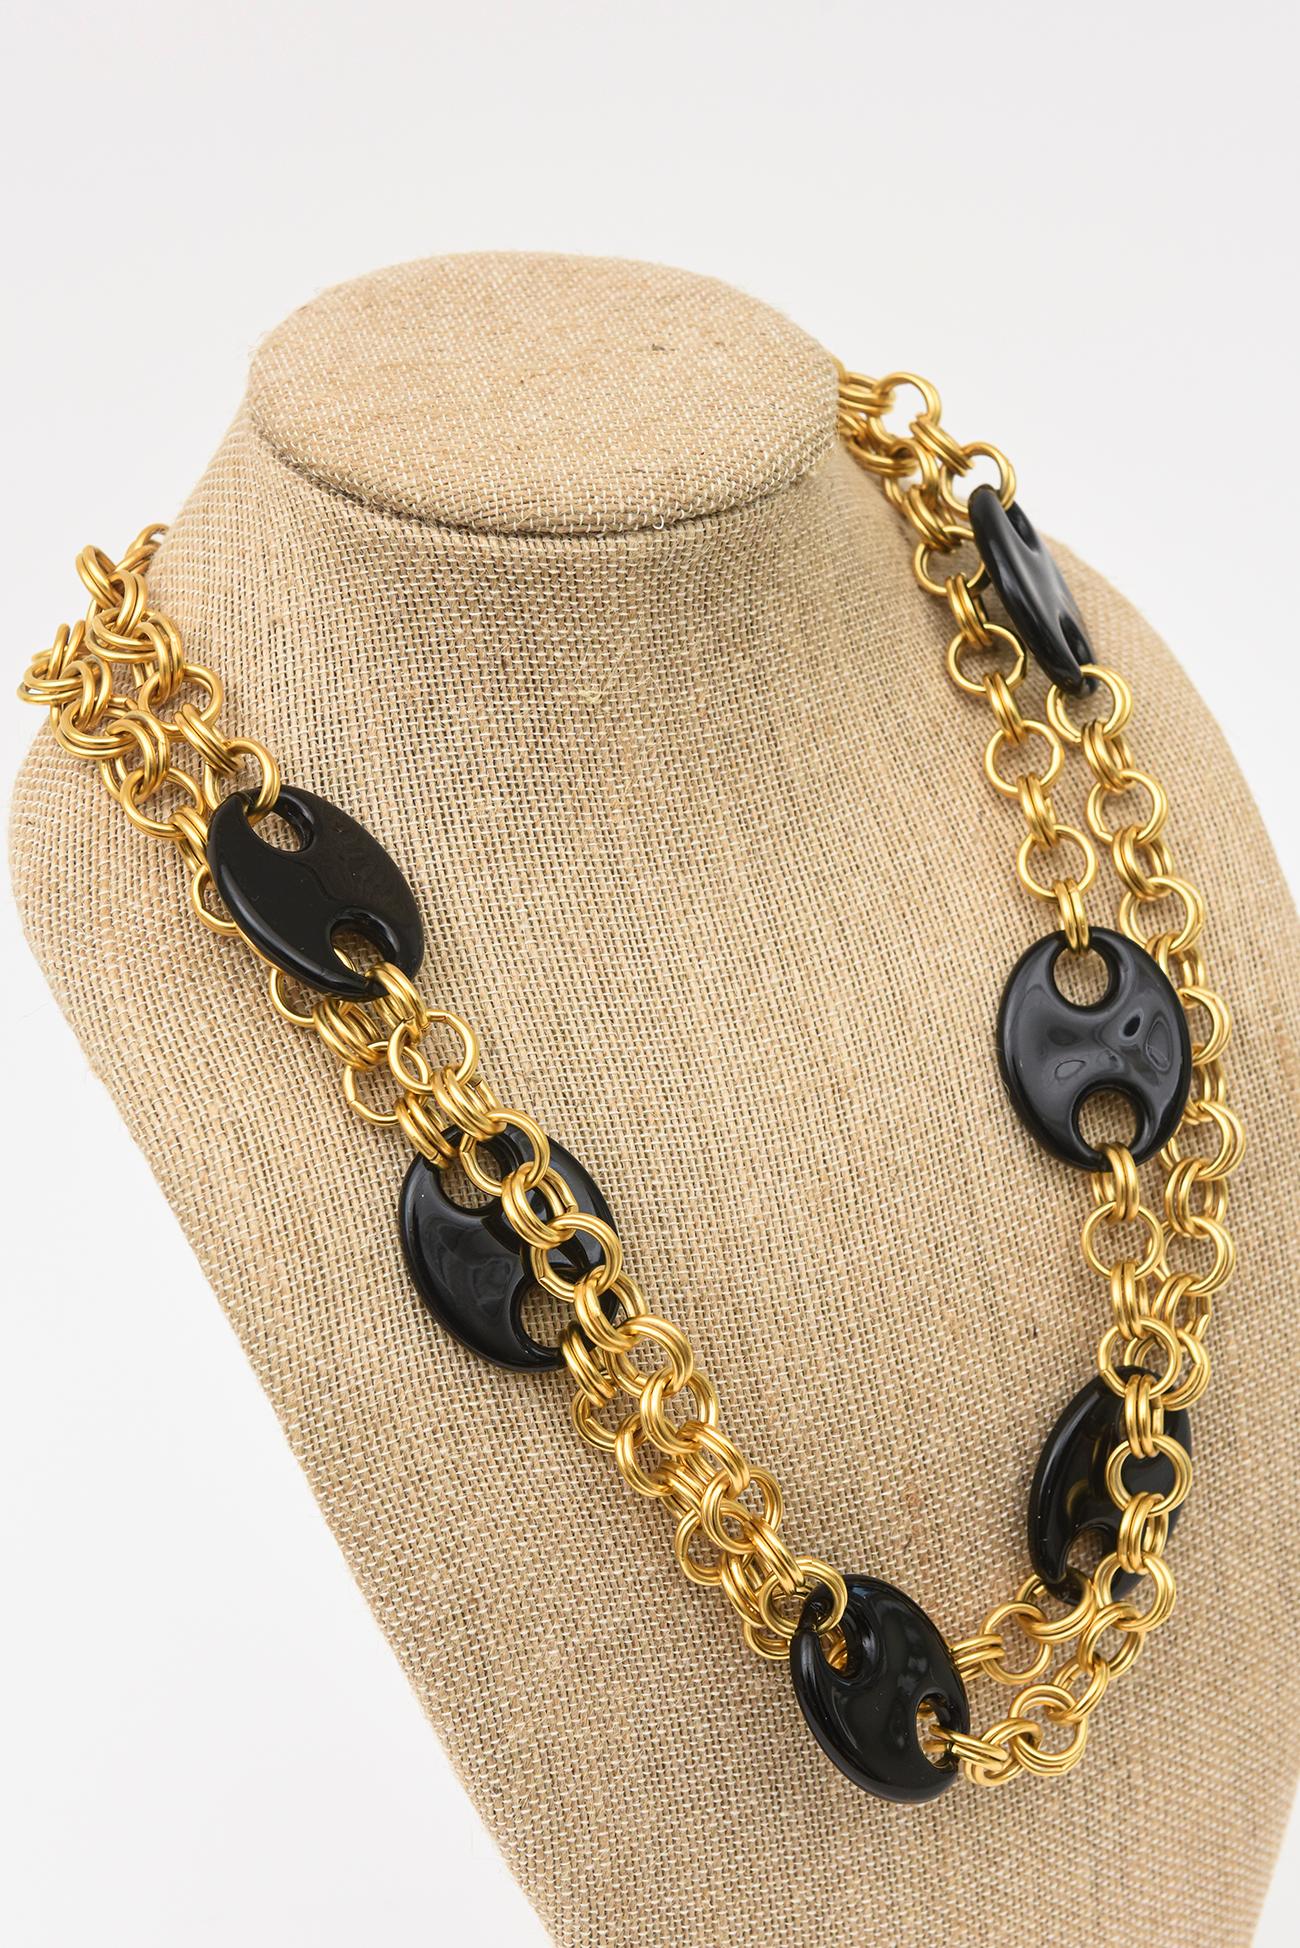 Karl Lagerfeld Vintage Brass Chain And Black Resin Disks Mariner Wrap Necklace For Sale 4